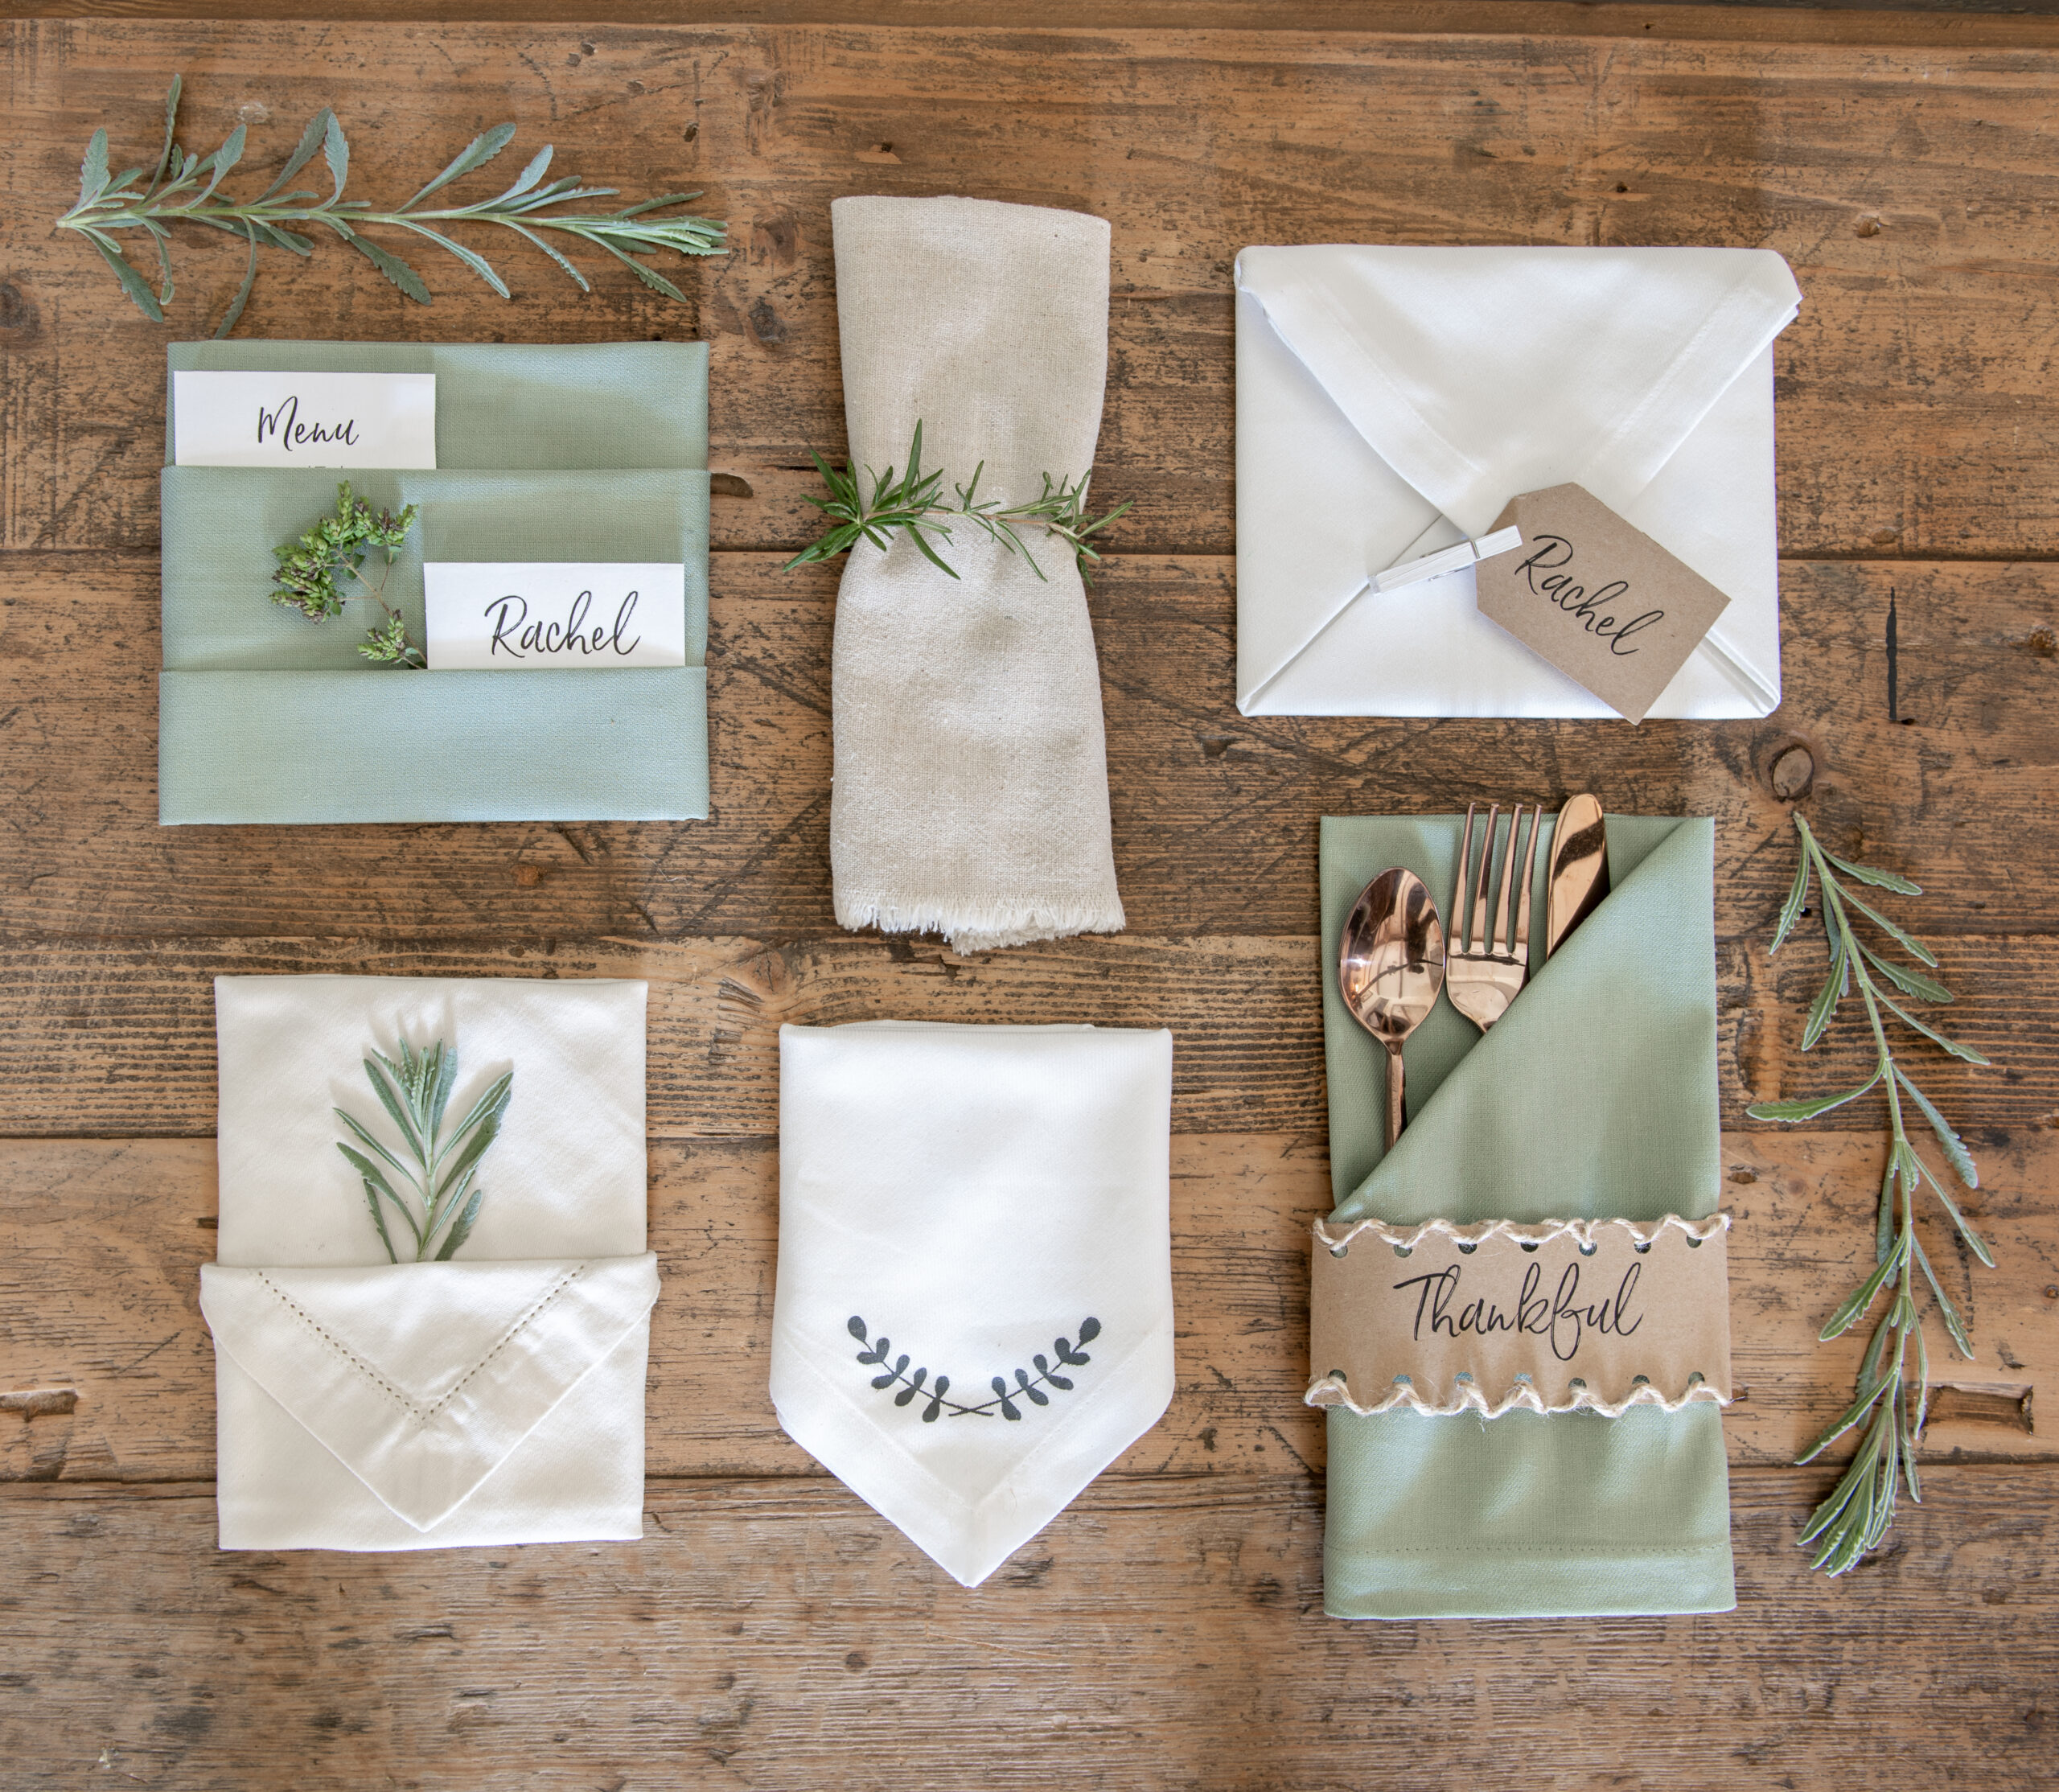 How to Store Cloth Napkins Using the Fold Method